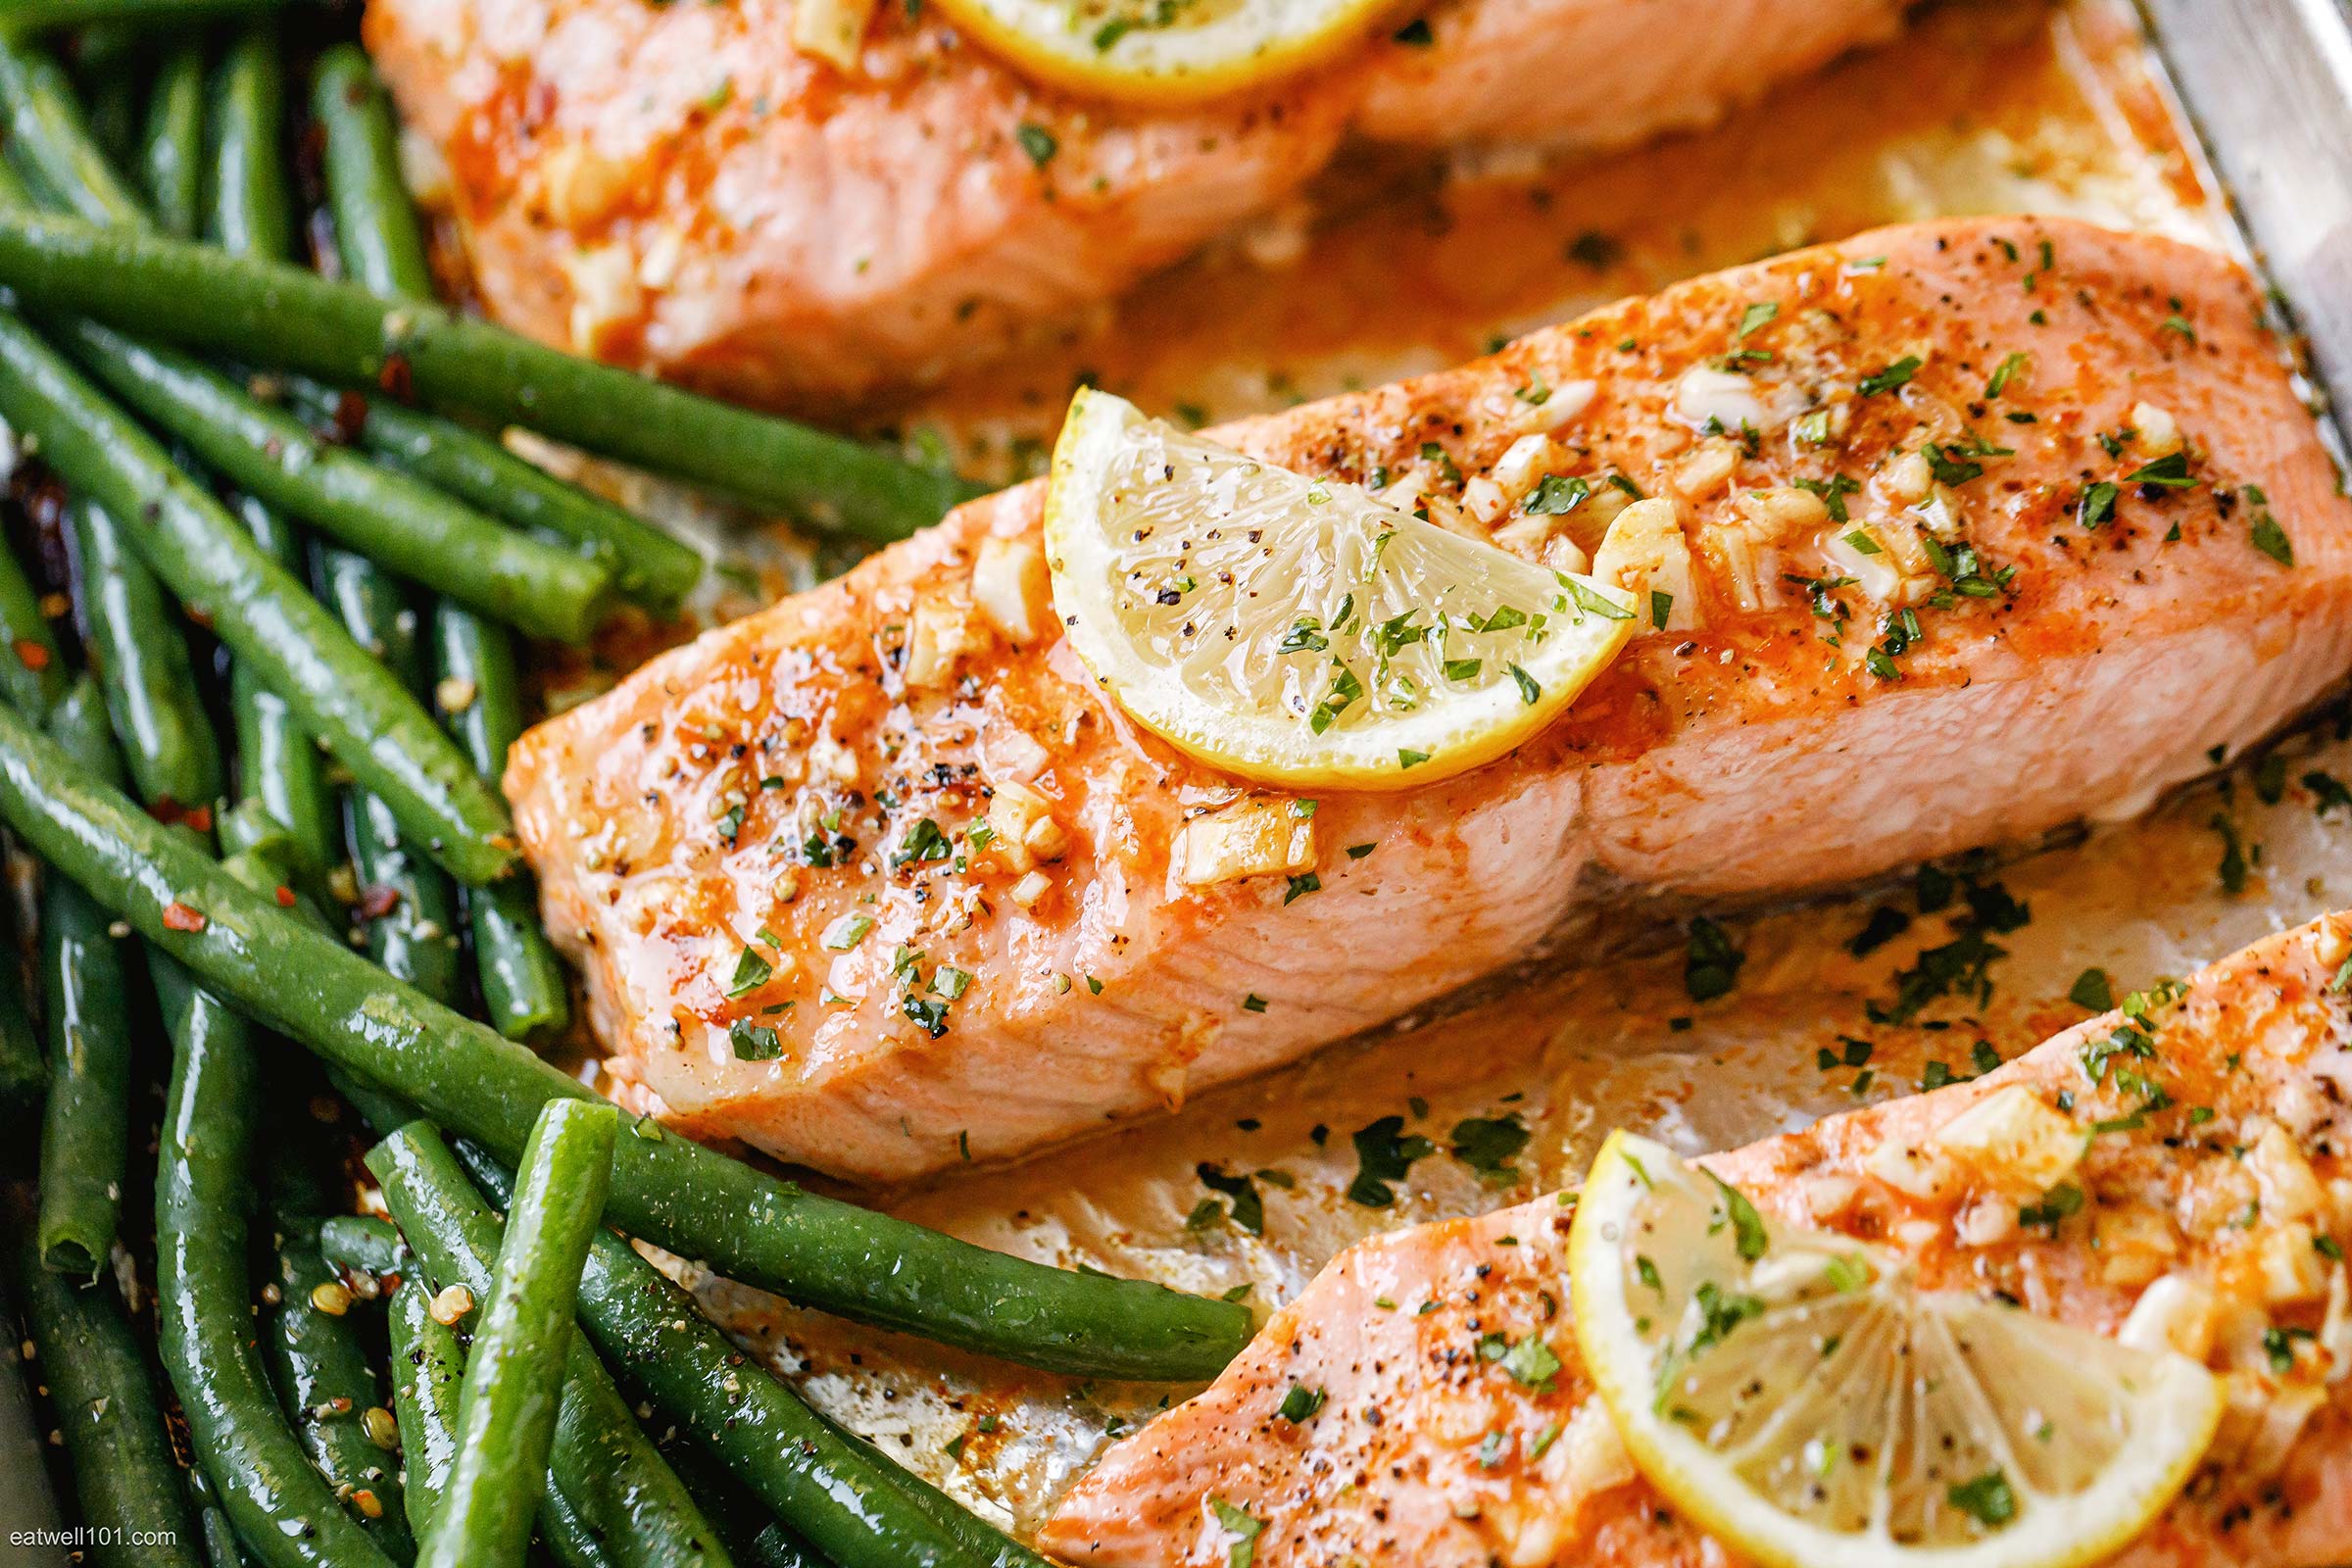 Cooked salmon fish meat topped with sliced lemons and string beans as garnish